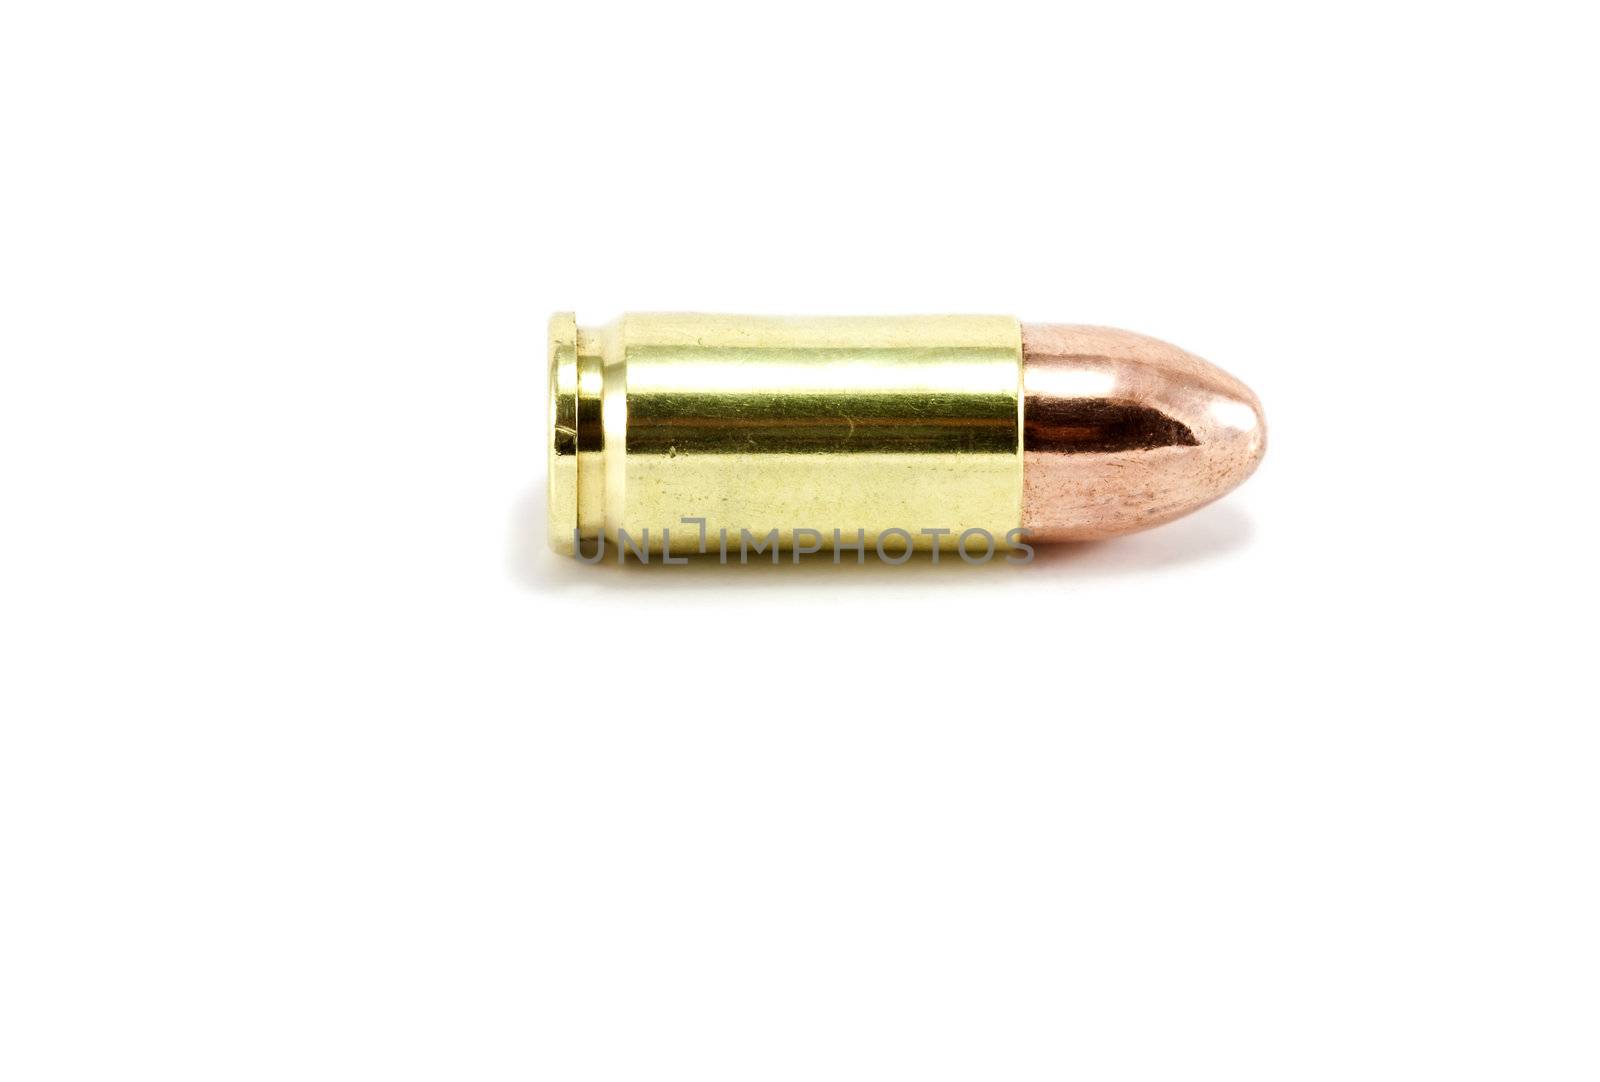 A single 9mm bullet by ChrisAlleaume